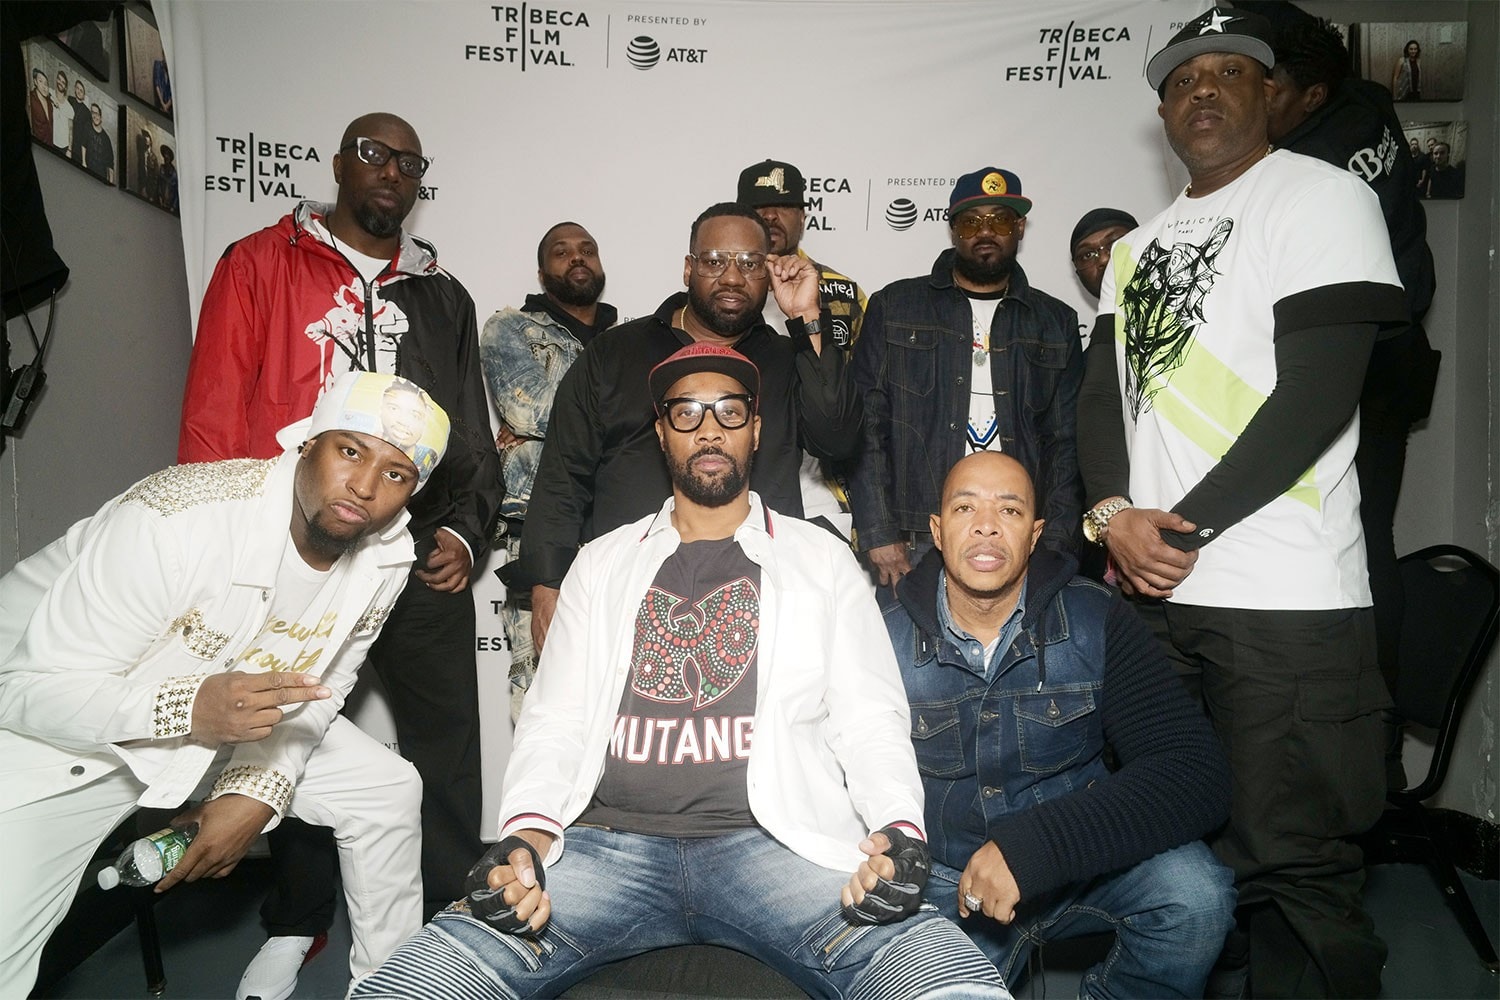 The Wu-Tang Clan Of Mics and Men Once Upon a Time in Shaolin Martin Shkreli